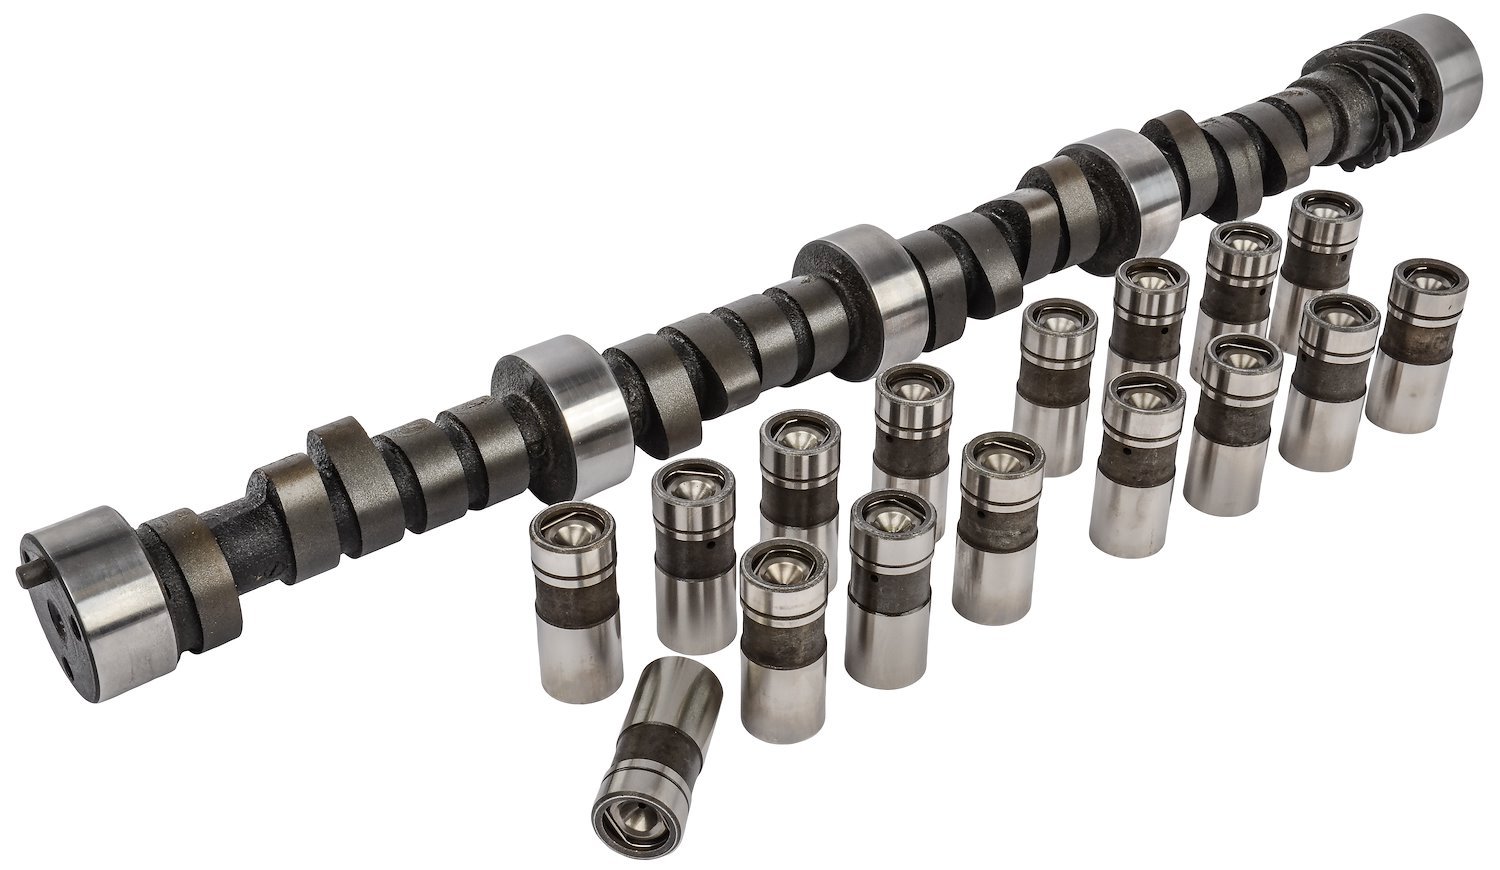 Hydraulic Flat Tappet Camshaft & Lifters 1957-1985 Chevy